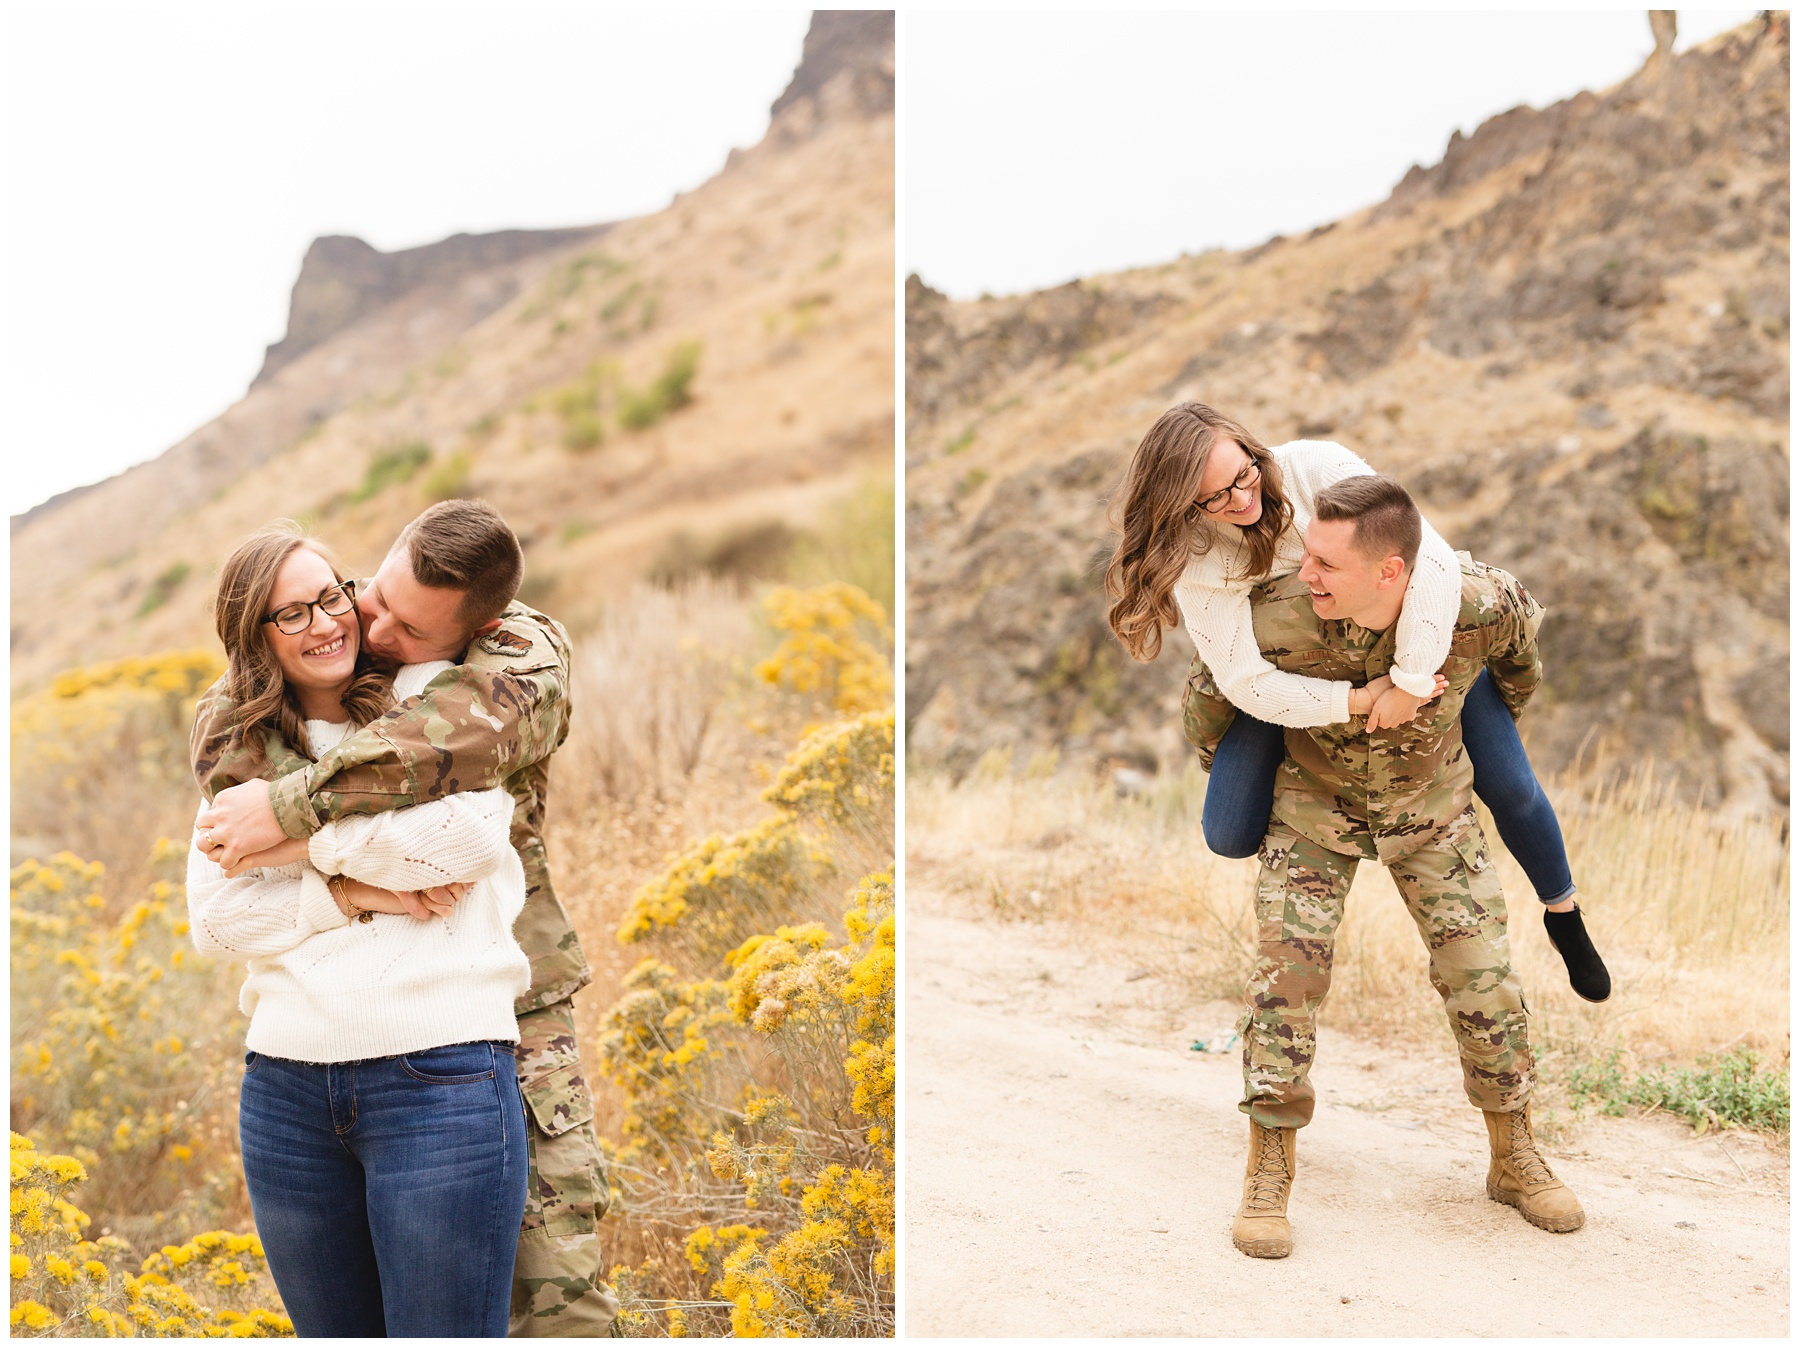 couple hugging and giving piggy back rides. husband in military OCPs, at sunset in natural light. Boise Photo Session by Miranda Renee Photography